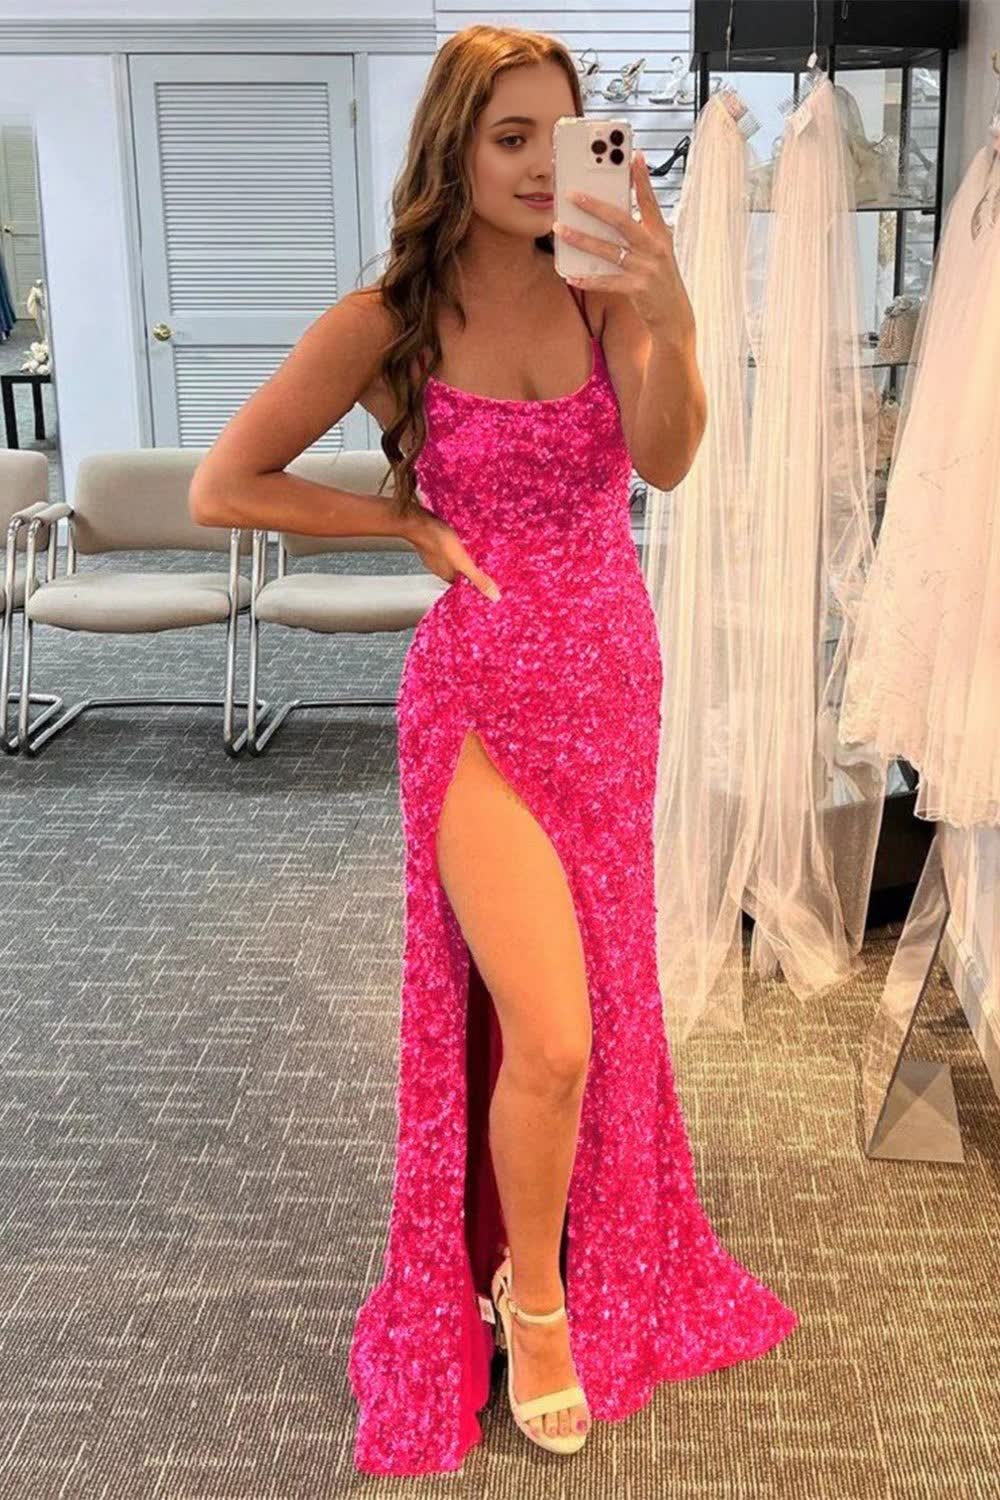 Mermaid Glitter Sequins Sexy Hot Pink Backless Long Corset Prom Dress outfits, Mermaid Glitter Sequins Sexy Hot Pink Backless Long Prom Dress